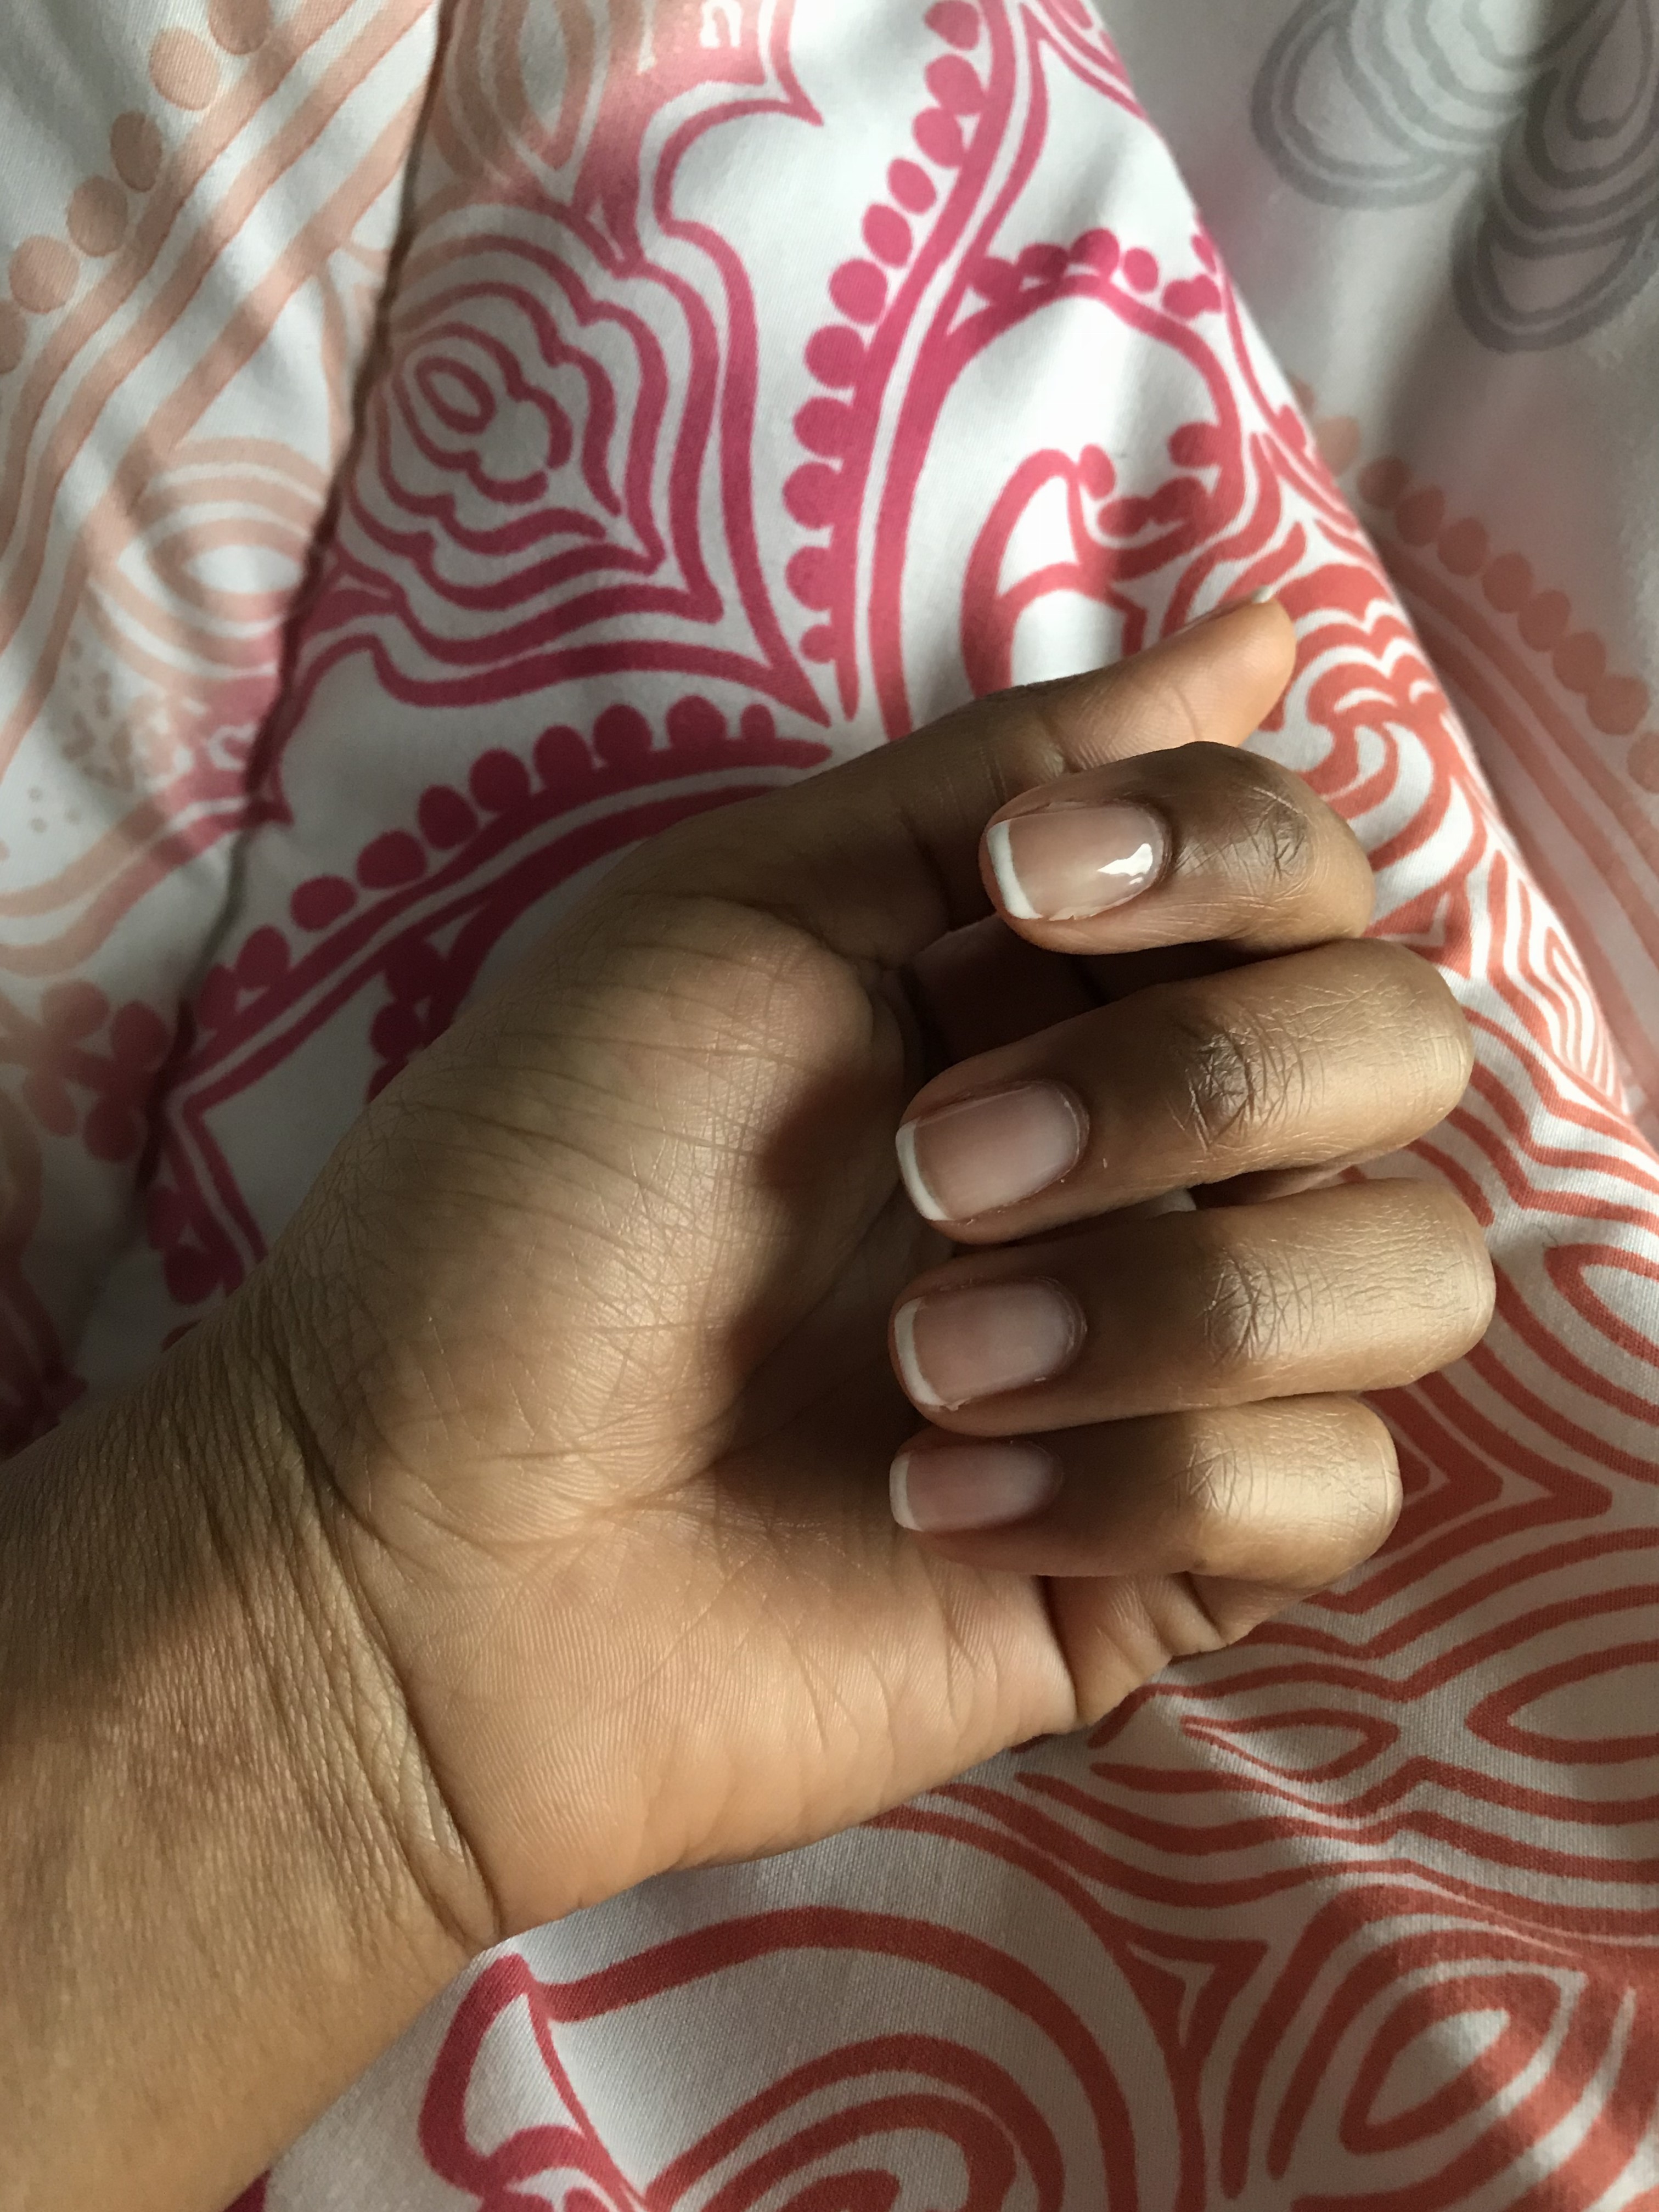 A picture of my nails that I recently got done